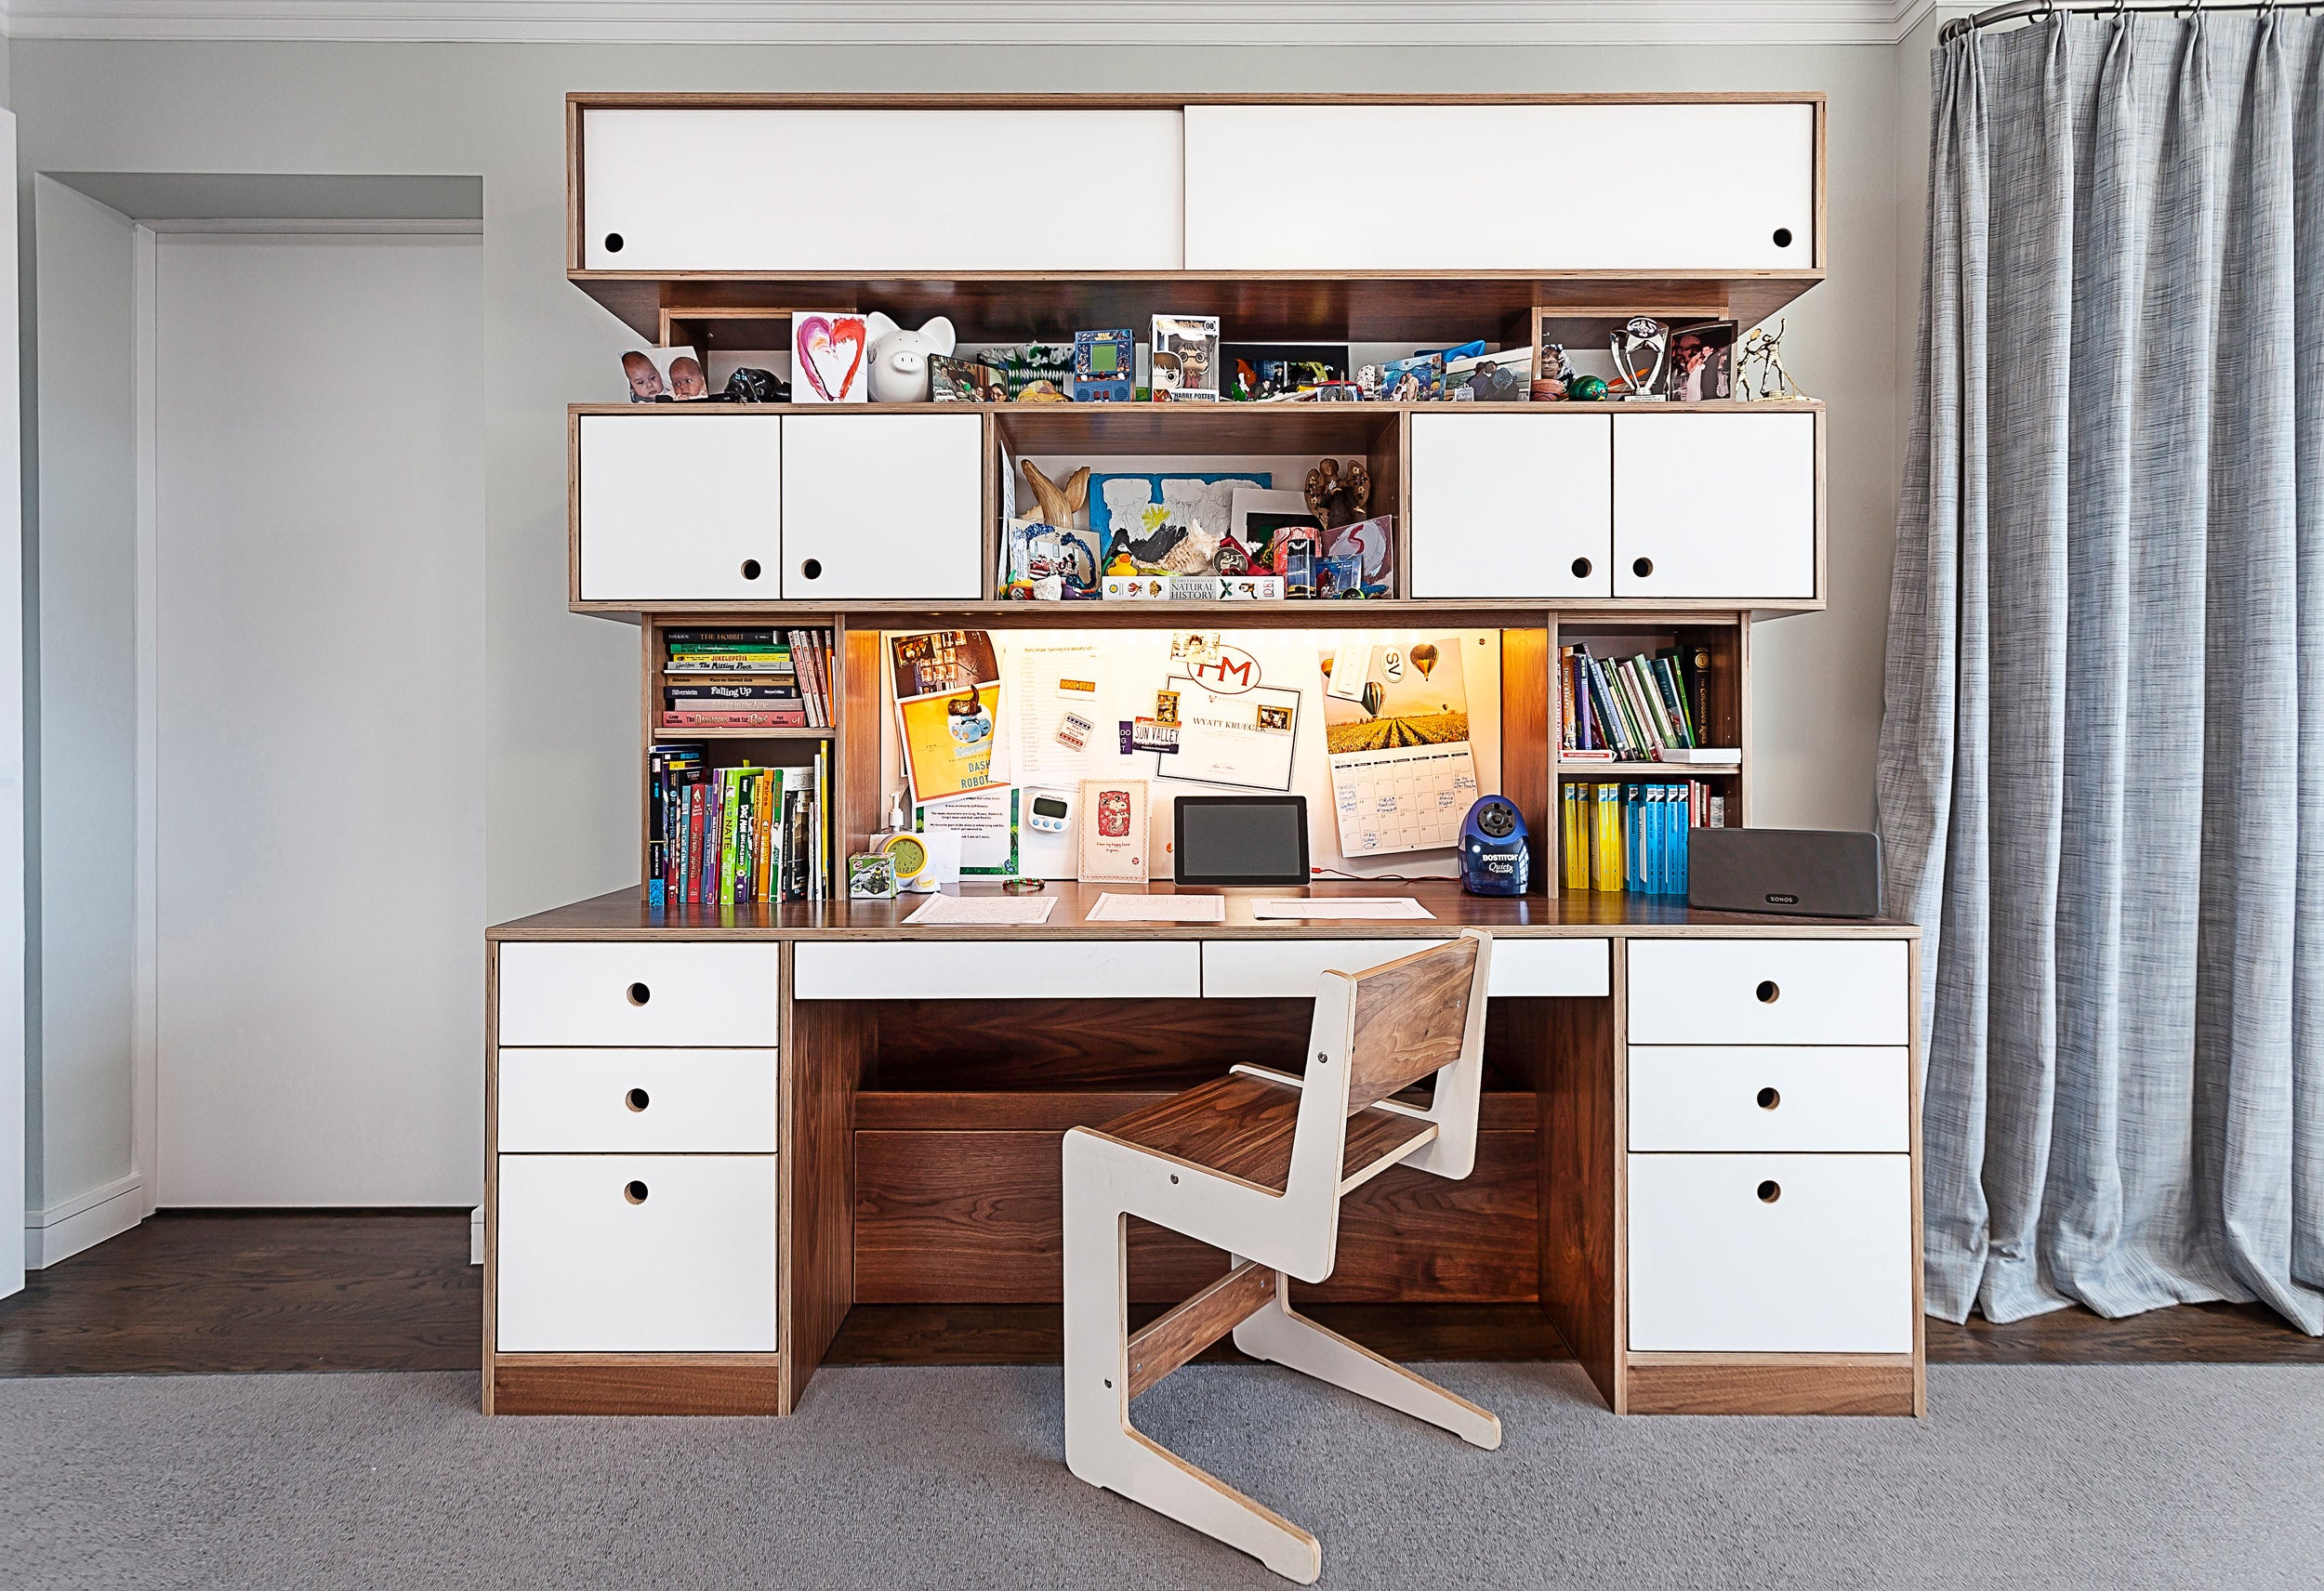 Elegant home office with white desk, matching drawers, shelves filled with books, and a stylish chair.